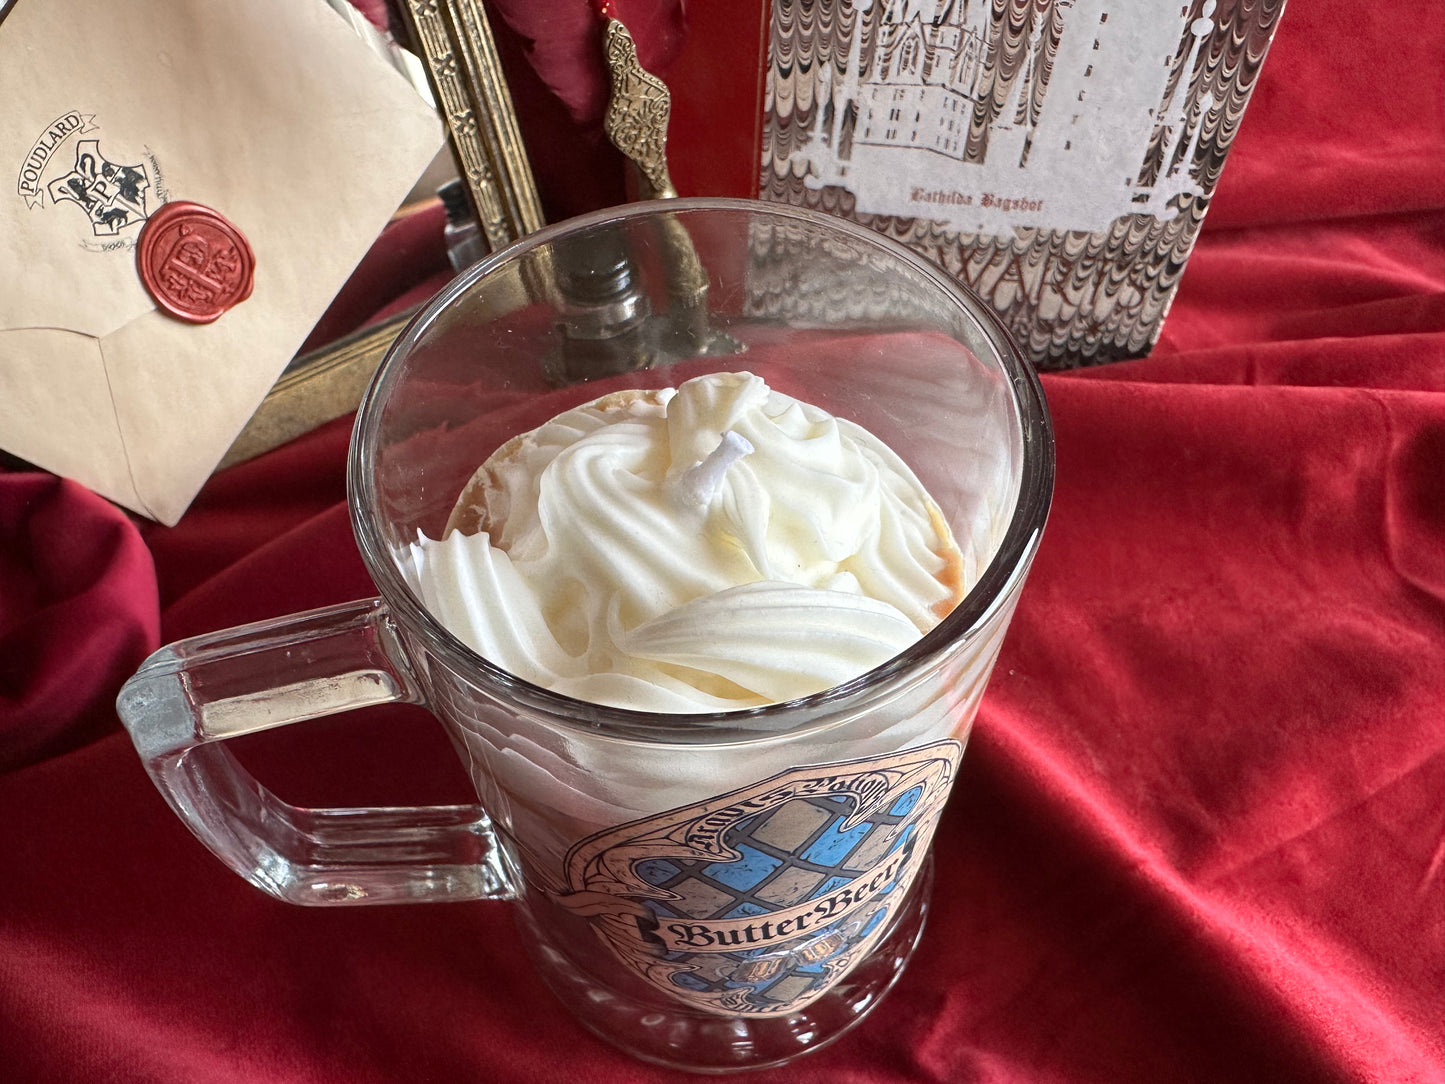 Butterbeer bougie/candle